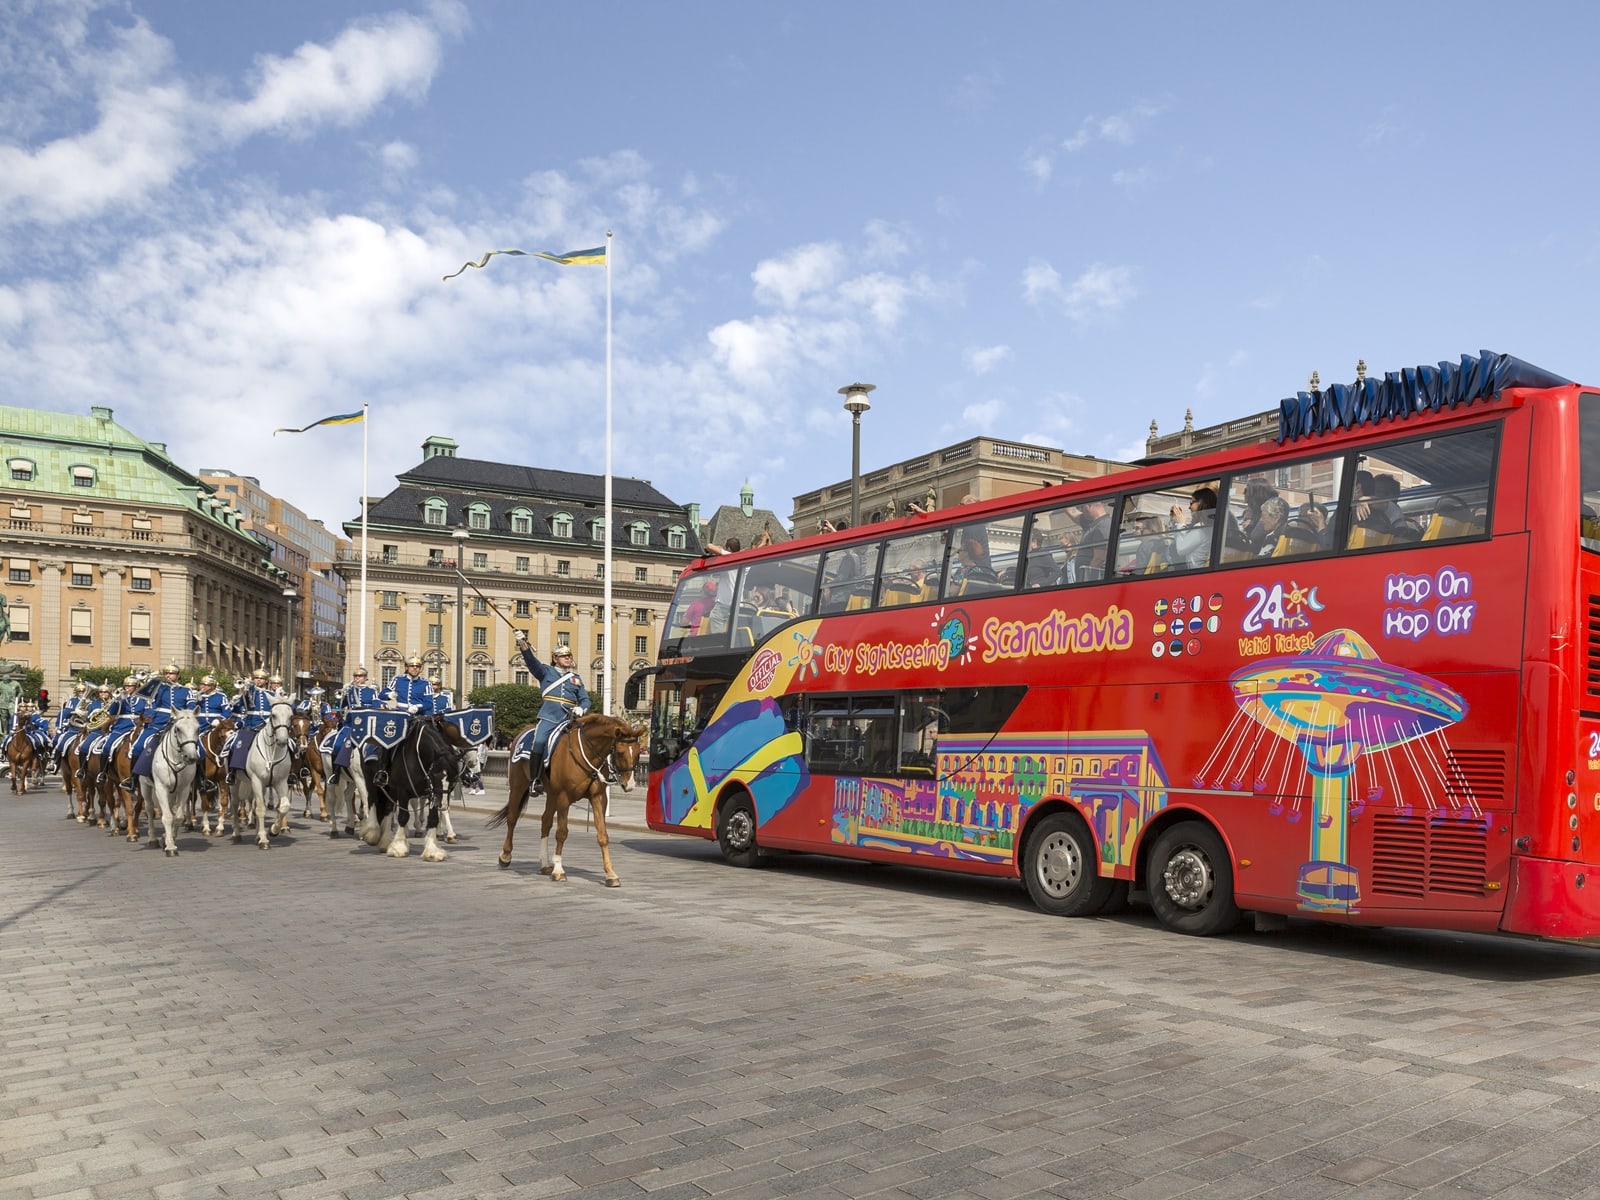 Stockholm Hop-On Hop-Off City Sightseeing Tour by Bus or Boat tours, activities, fun things to do in